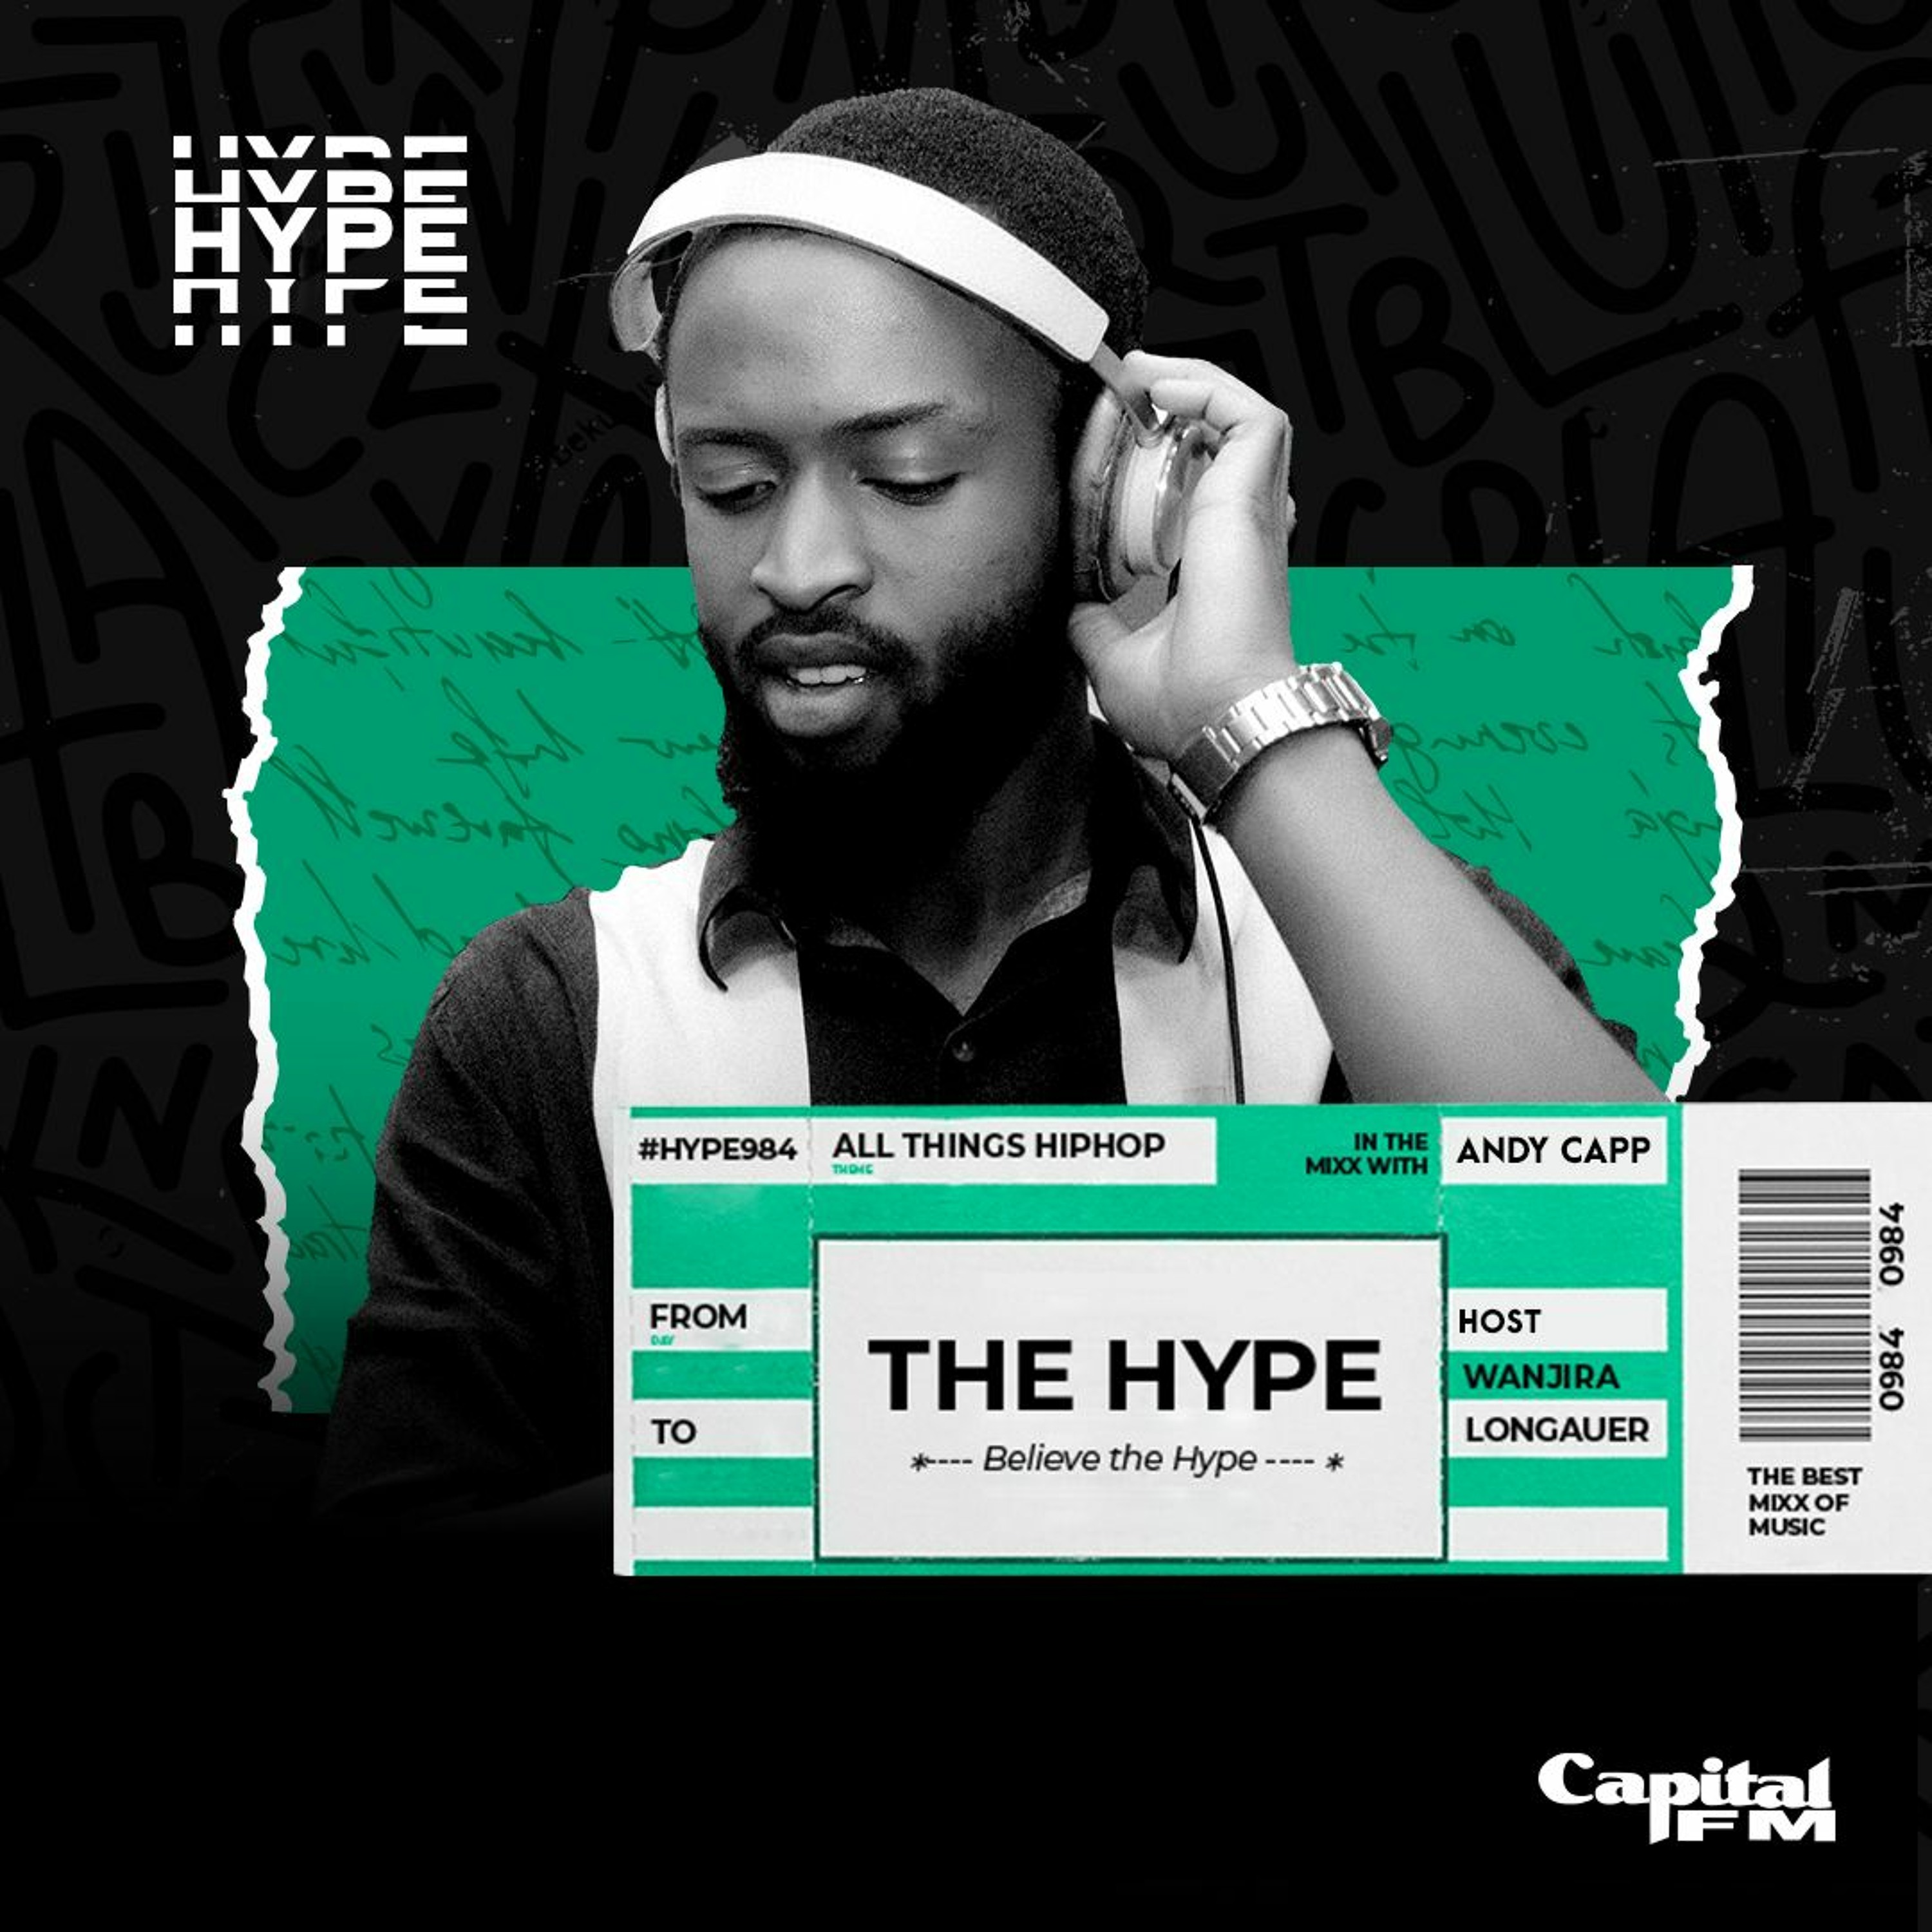 Andy Capp The DJ In The Mix | The Hype 984 | All Things Hip Hop, RnB & Afrobeats